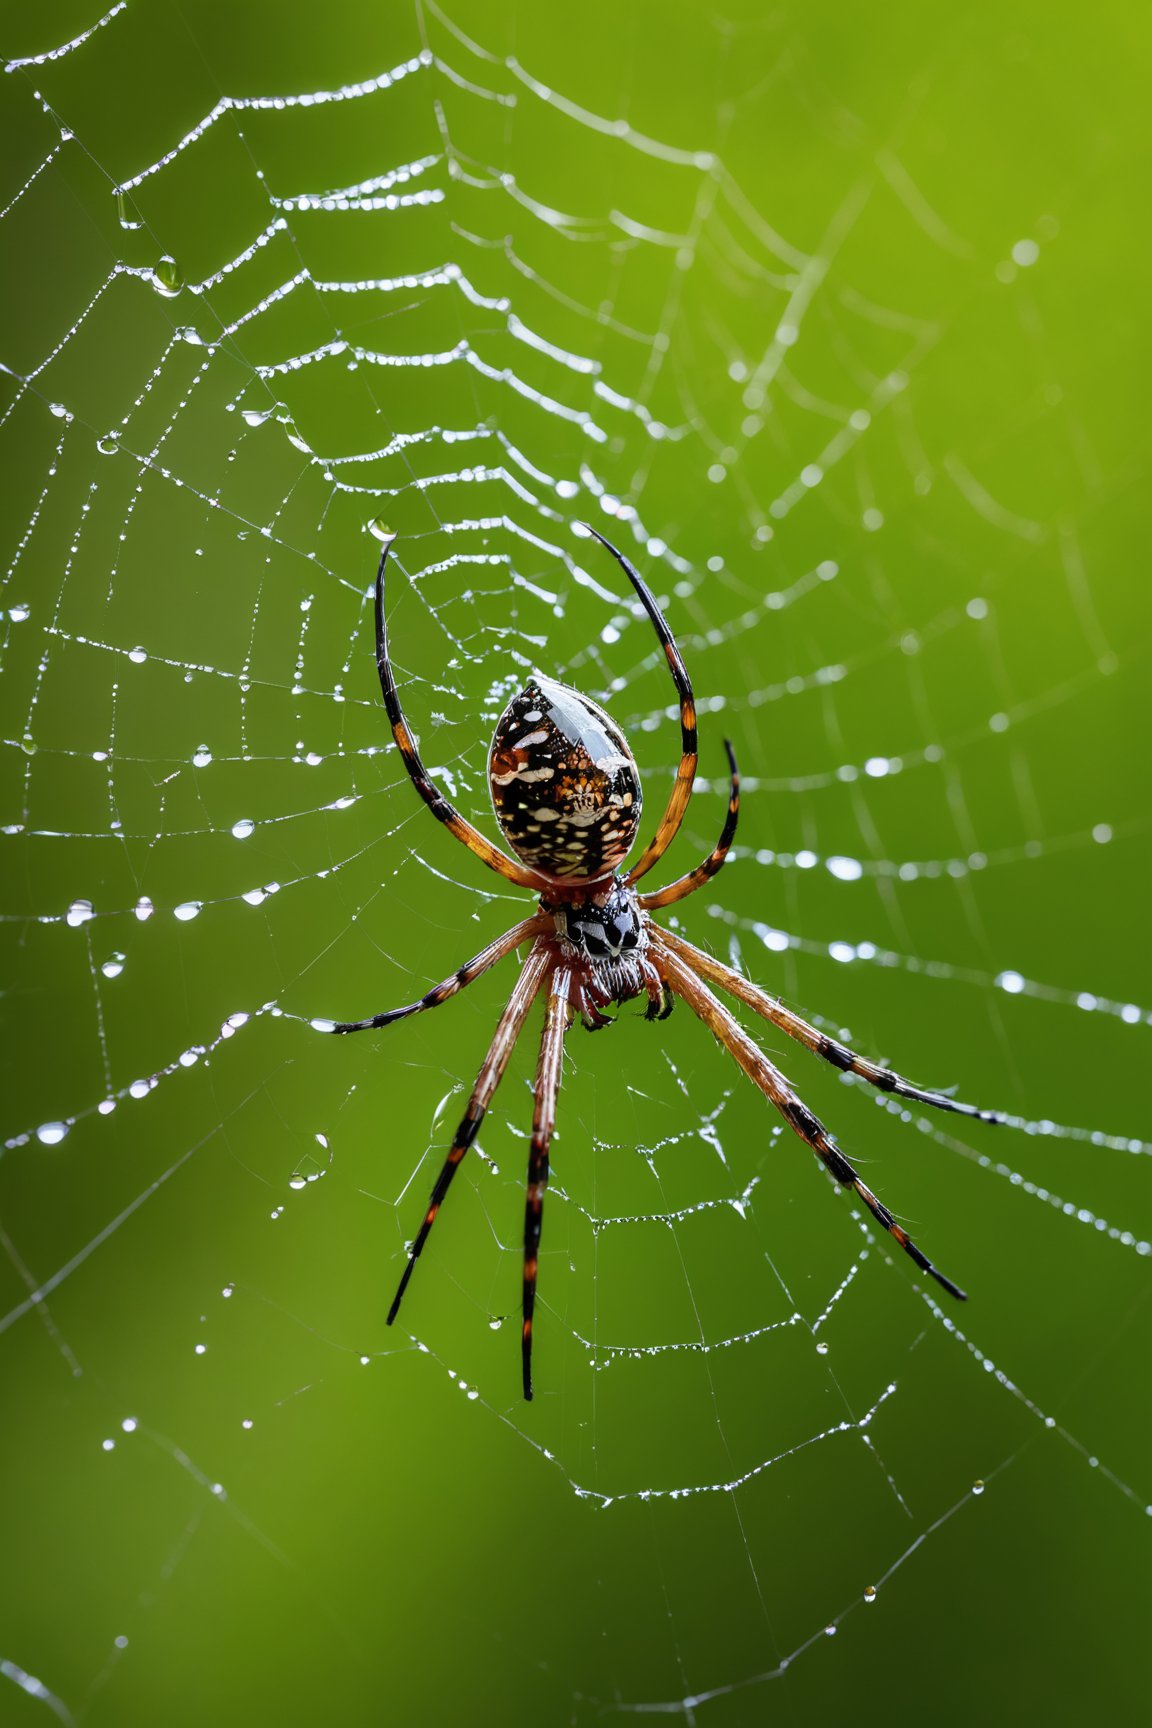 (best quality, 8K, highres, masterpiece), ultra-detailed close-up macro photography of a spider, positioned delicately on its web. The web, a masterpiece of natural engineering, is highlighted with water droplets that shimmer like jewels in the soft, diffused light of the forest background. Each droplet reflects the surrounding environment, creating a mosaic of the forest's beauty. The focus is razor-sharp on the spider, showcasing its intricate patterns and textures, while the web it has spun stretches out, capturing the elegance and fragility of its design. The forest background adds depth and context, blurring softly to emphasize the spider and its web in sharp relief. This image combines the wonders of nature with the artistry of macro photography, capturing a moment of serene beauty and the delicate balance of life in the forest ecosystem.